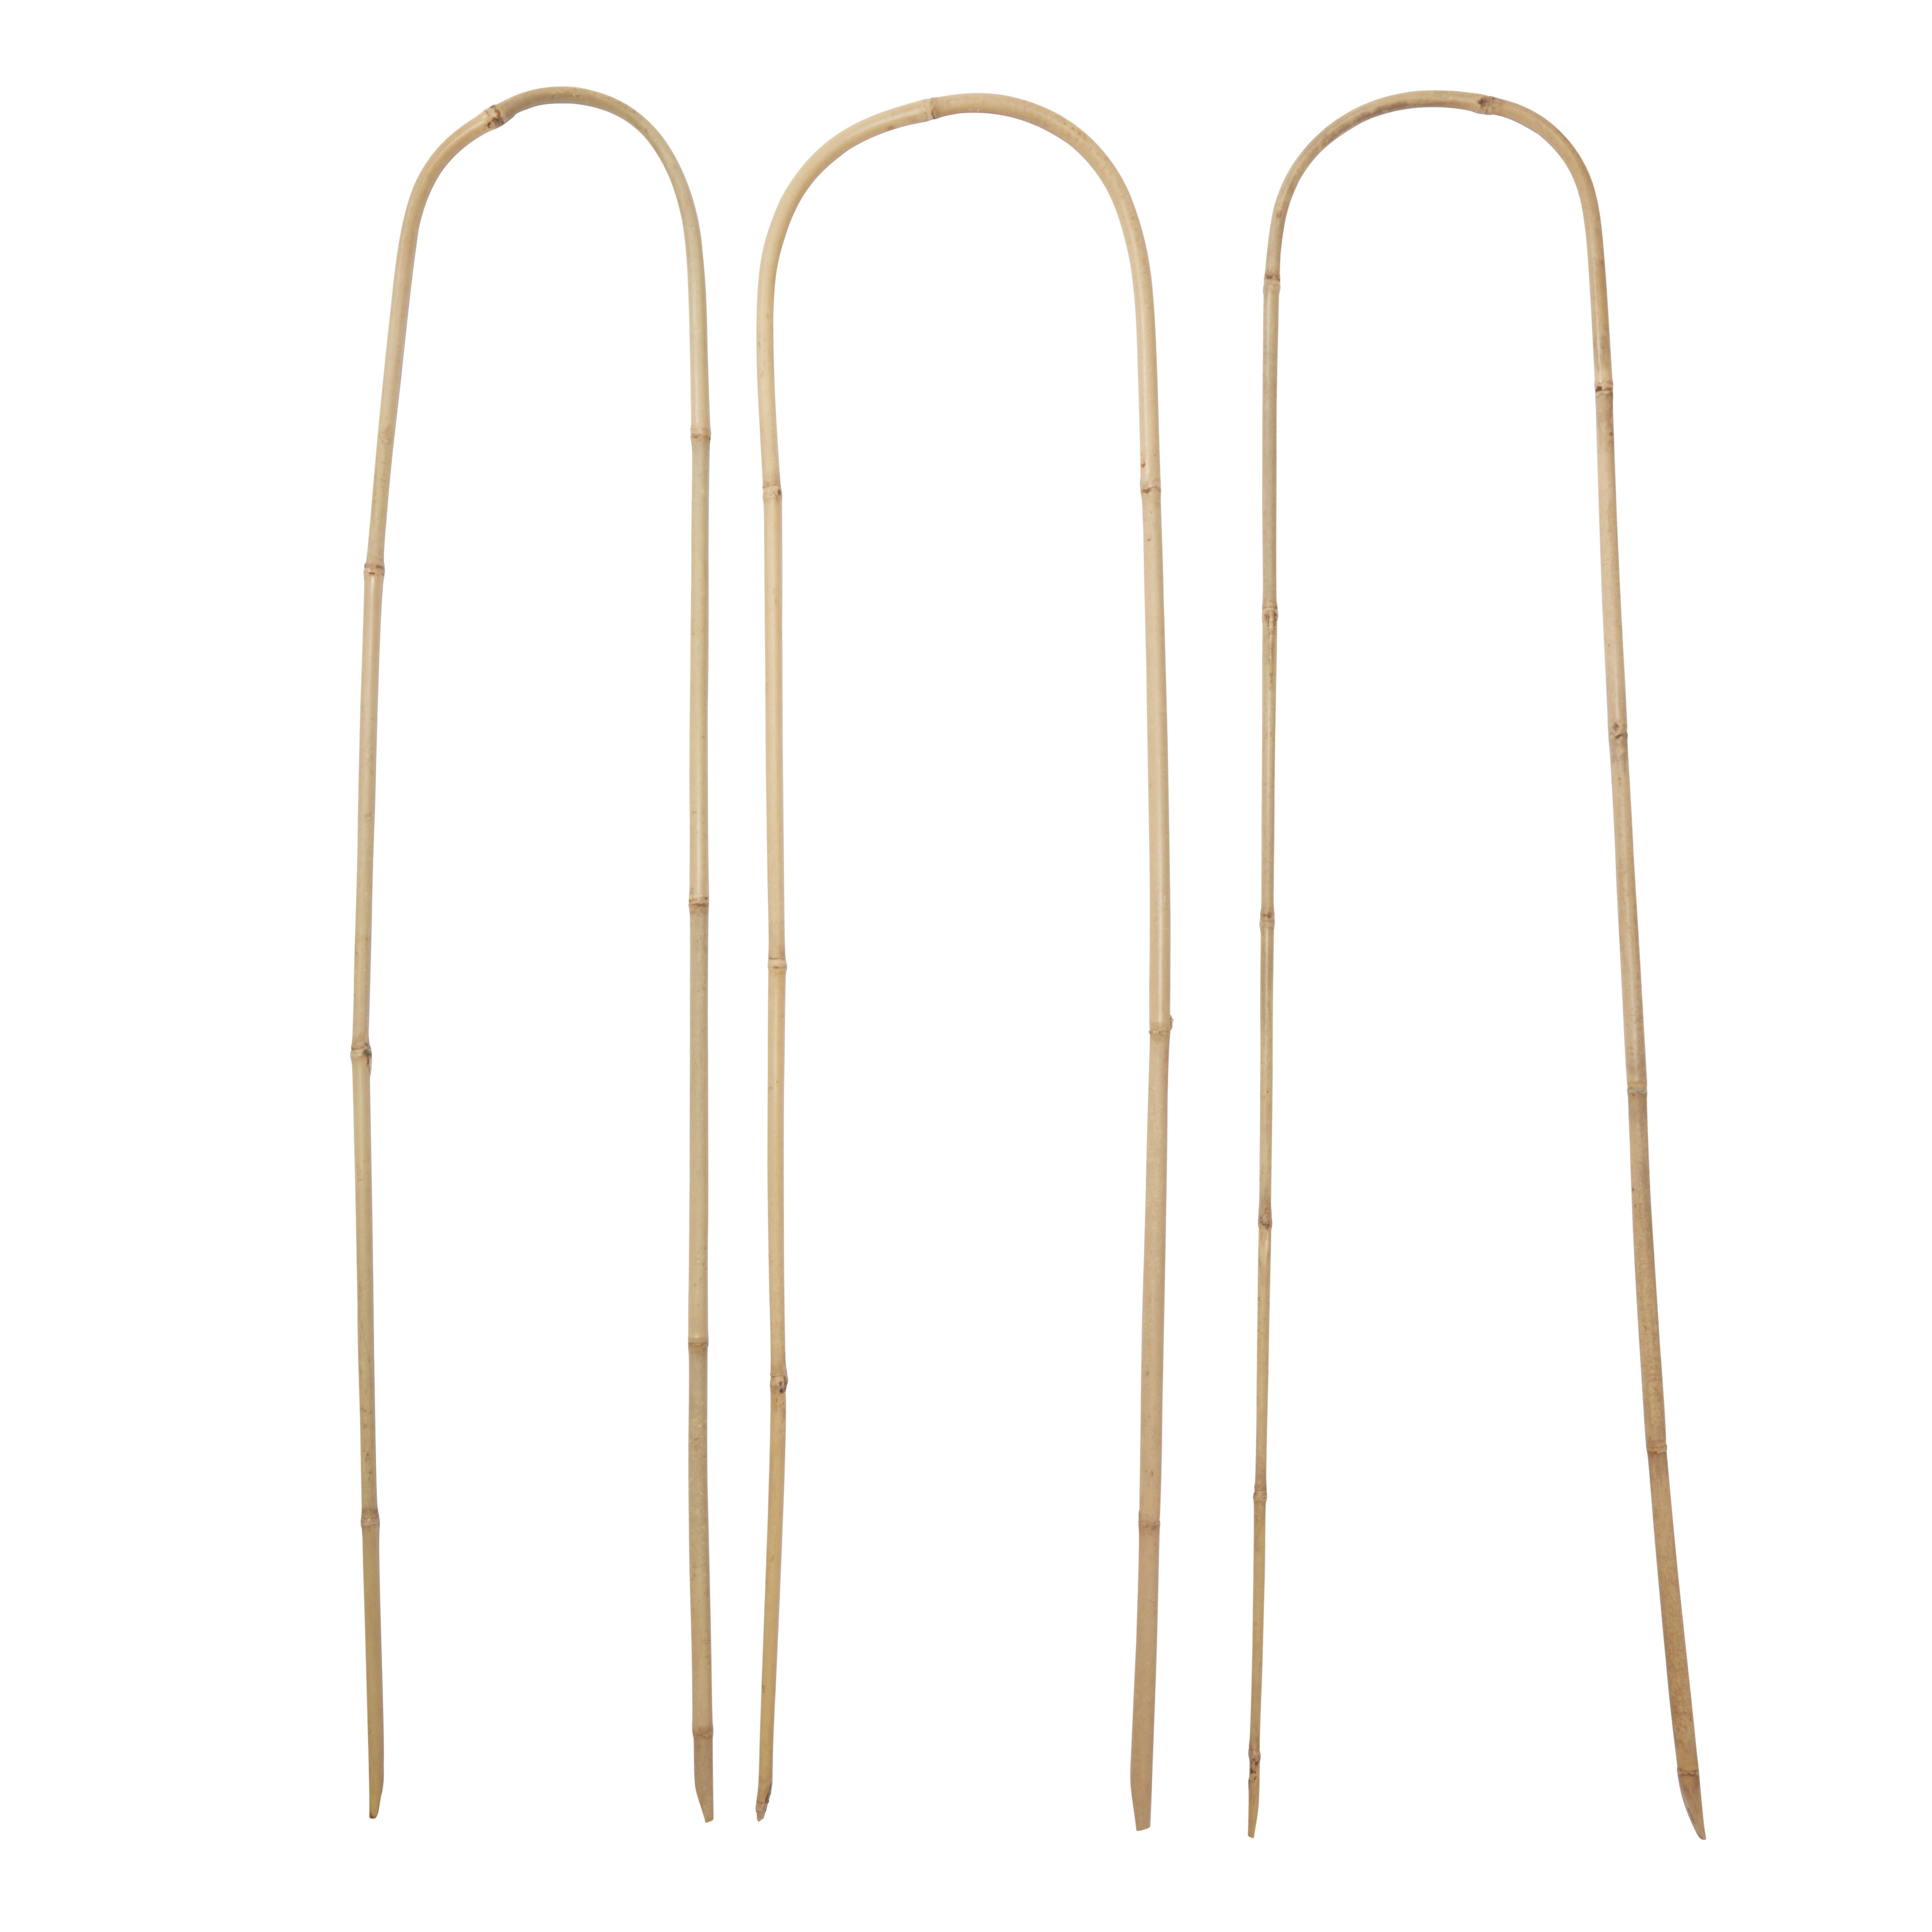 Verve Bamboo Hoop Plant support (L)120cm, Pack of 3